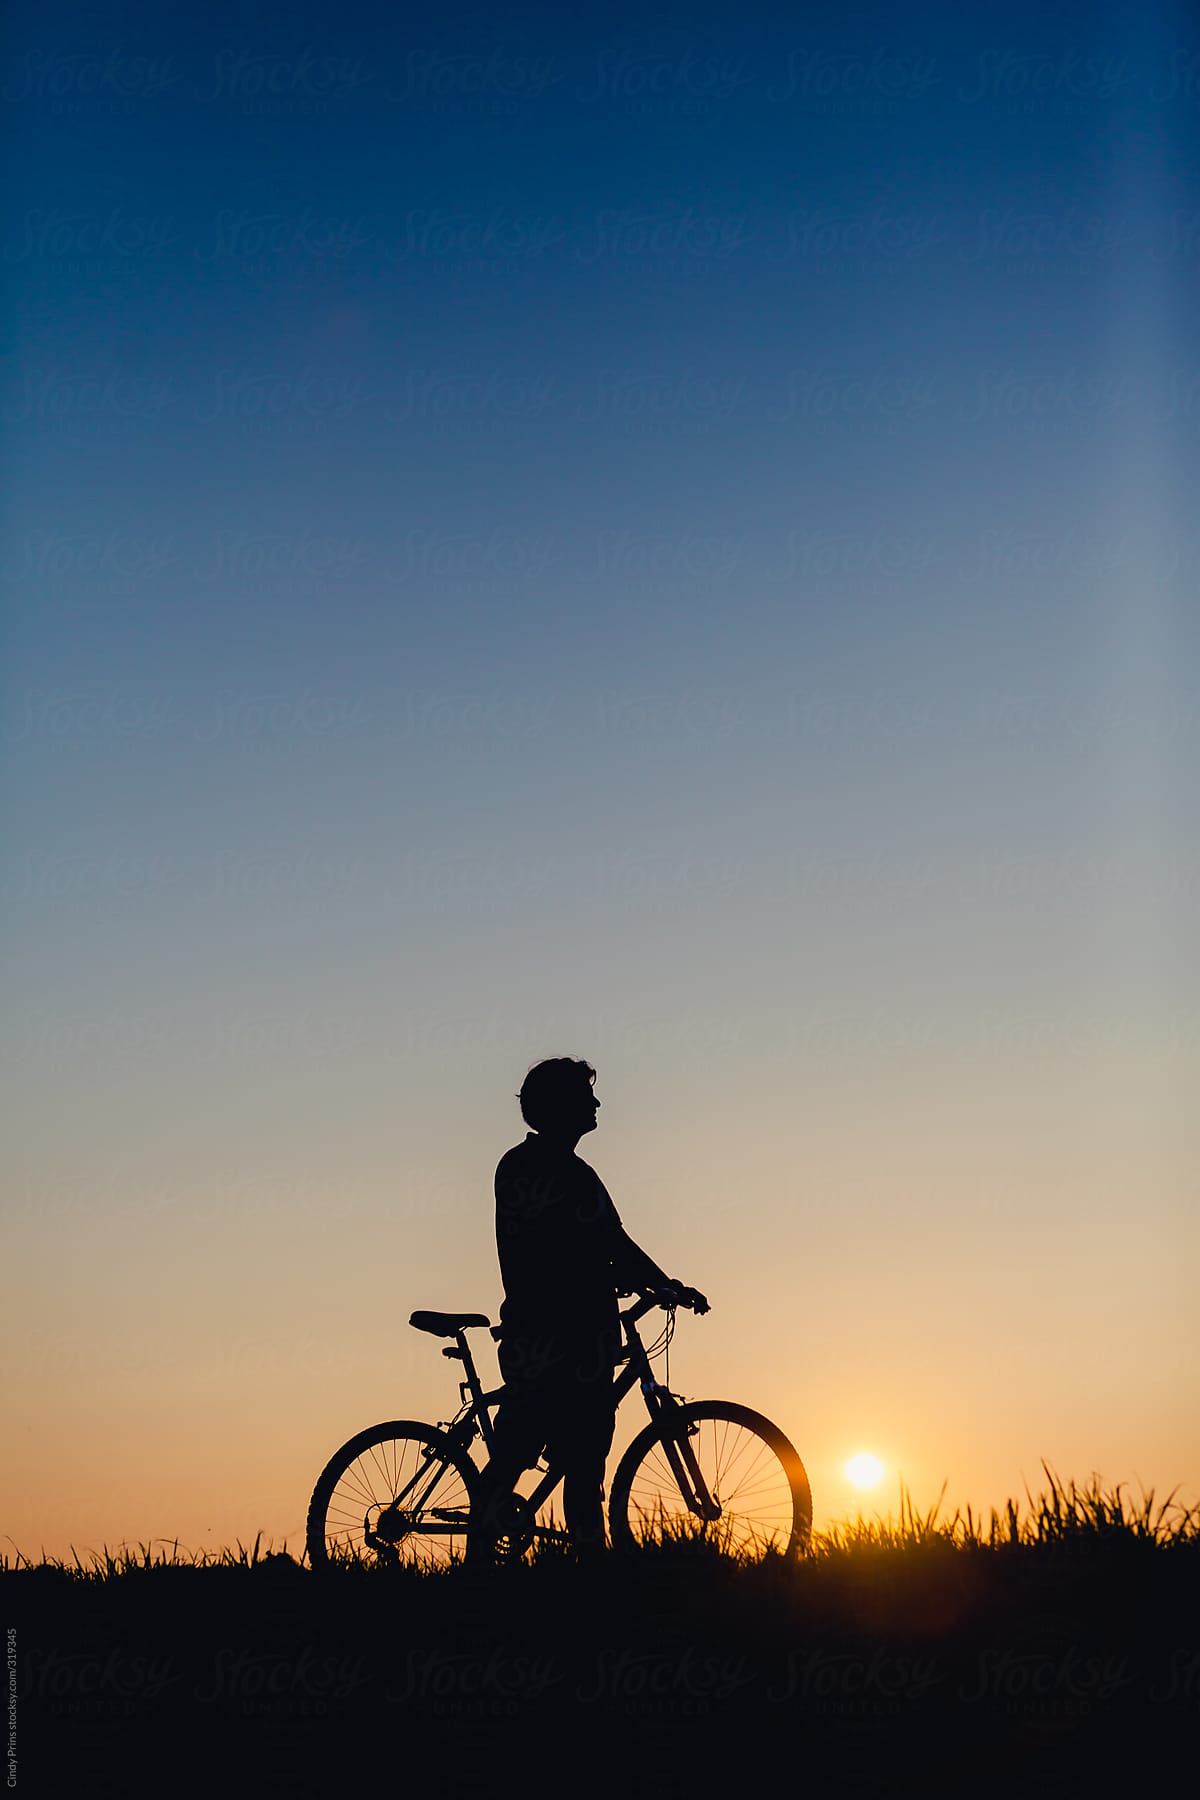 Silhouette of a man on a bike in a field during sunset